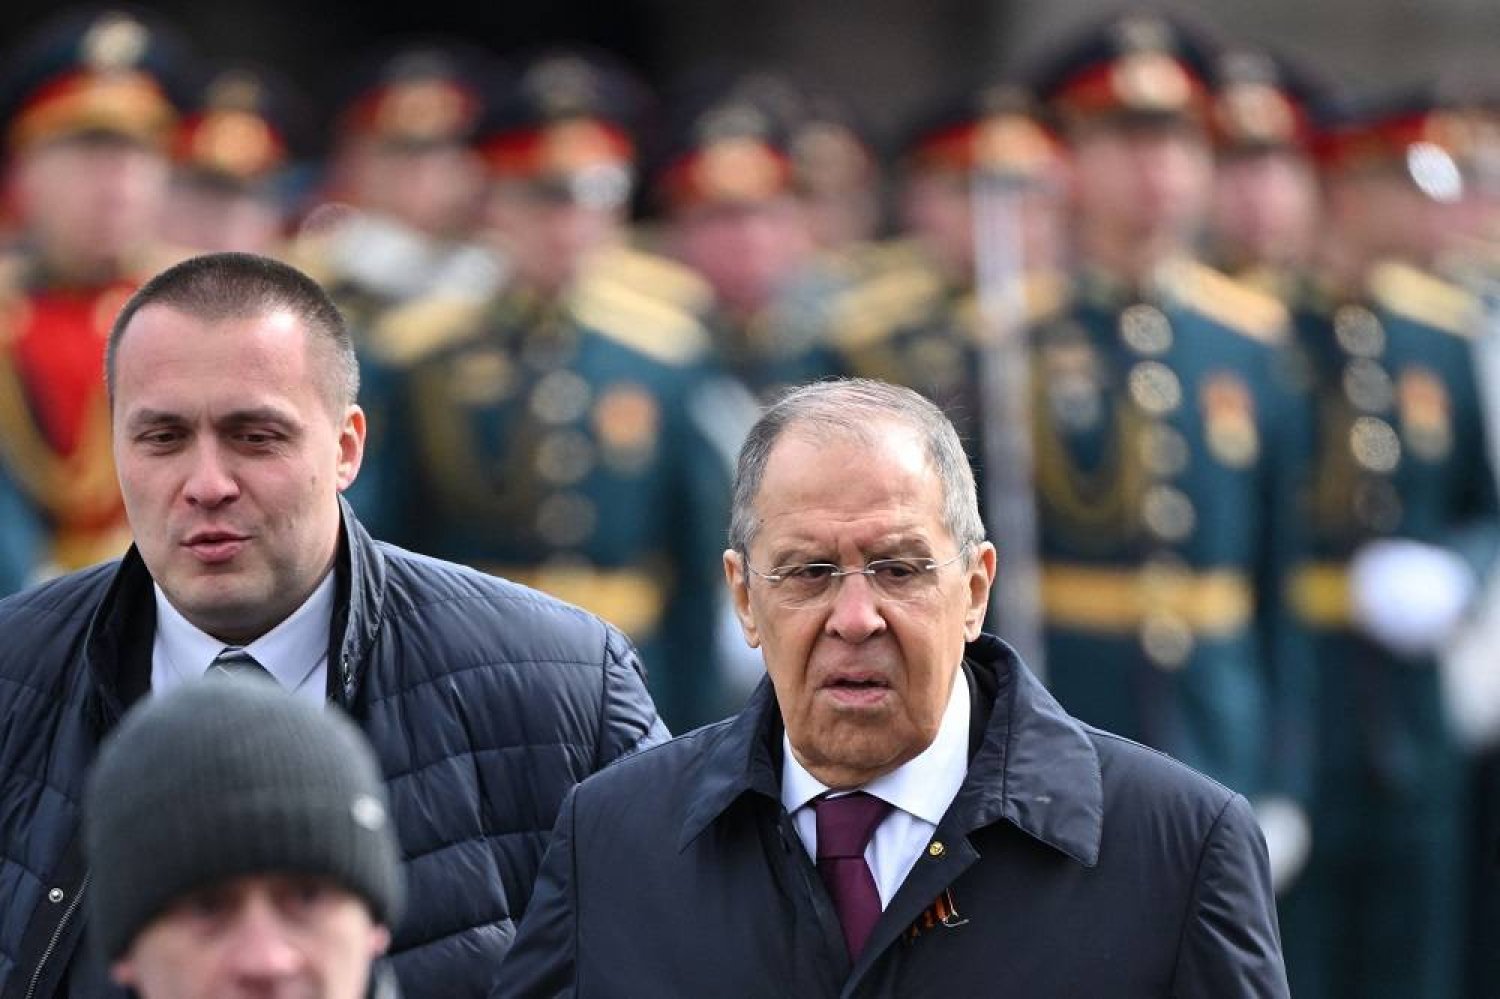 Russia's Foreign Minister Sergei Lavrov (R) arrives to attend the Victory Day military parade on Red Square in Moscow on May 9, 2024. Russia celebrates the 79th anniversary of the victory over Nazi Germany in World War II. (AFP)